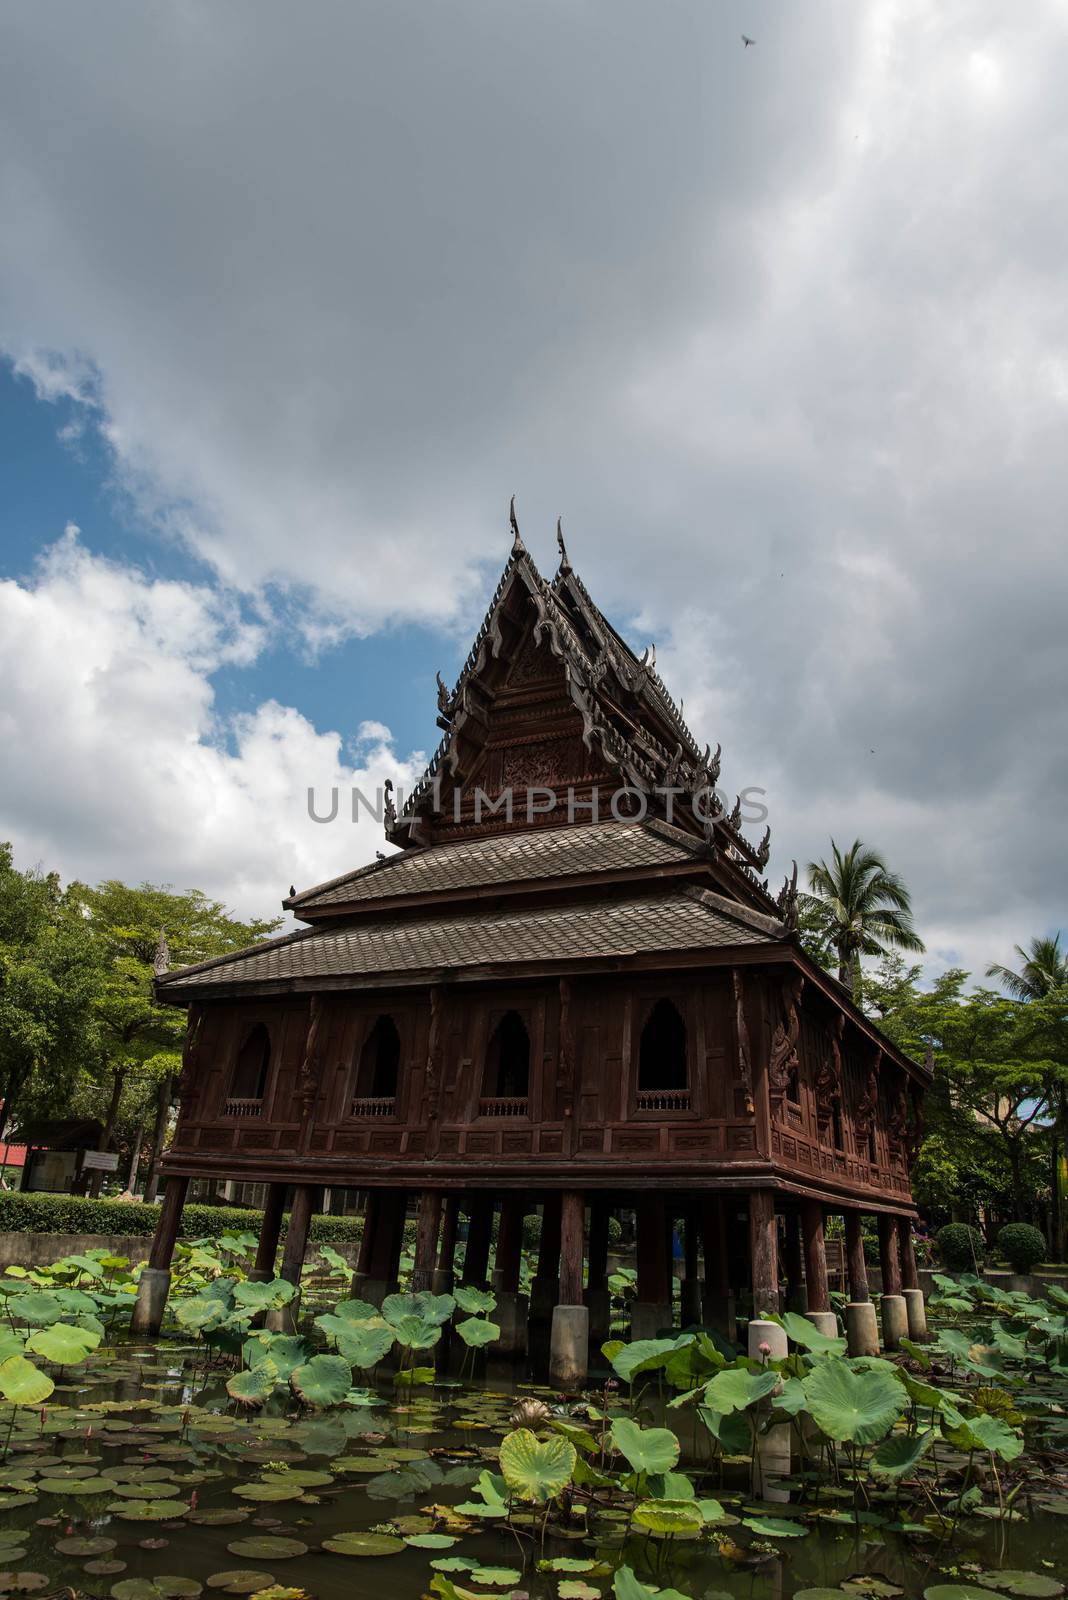 A wooden Pavilion in the country of Thailand